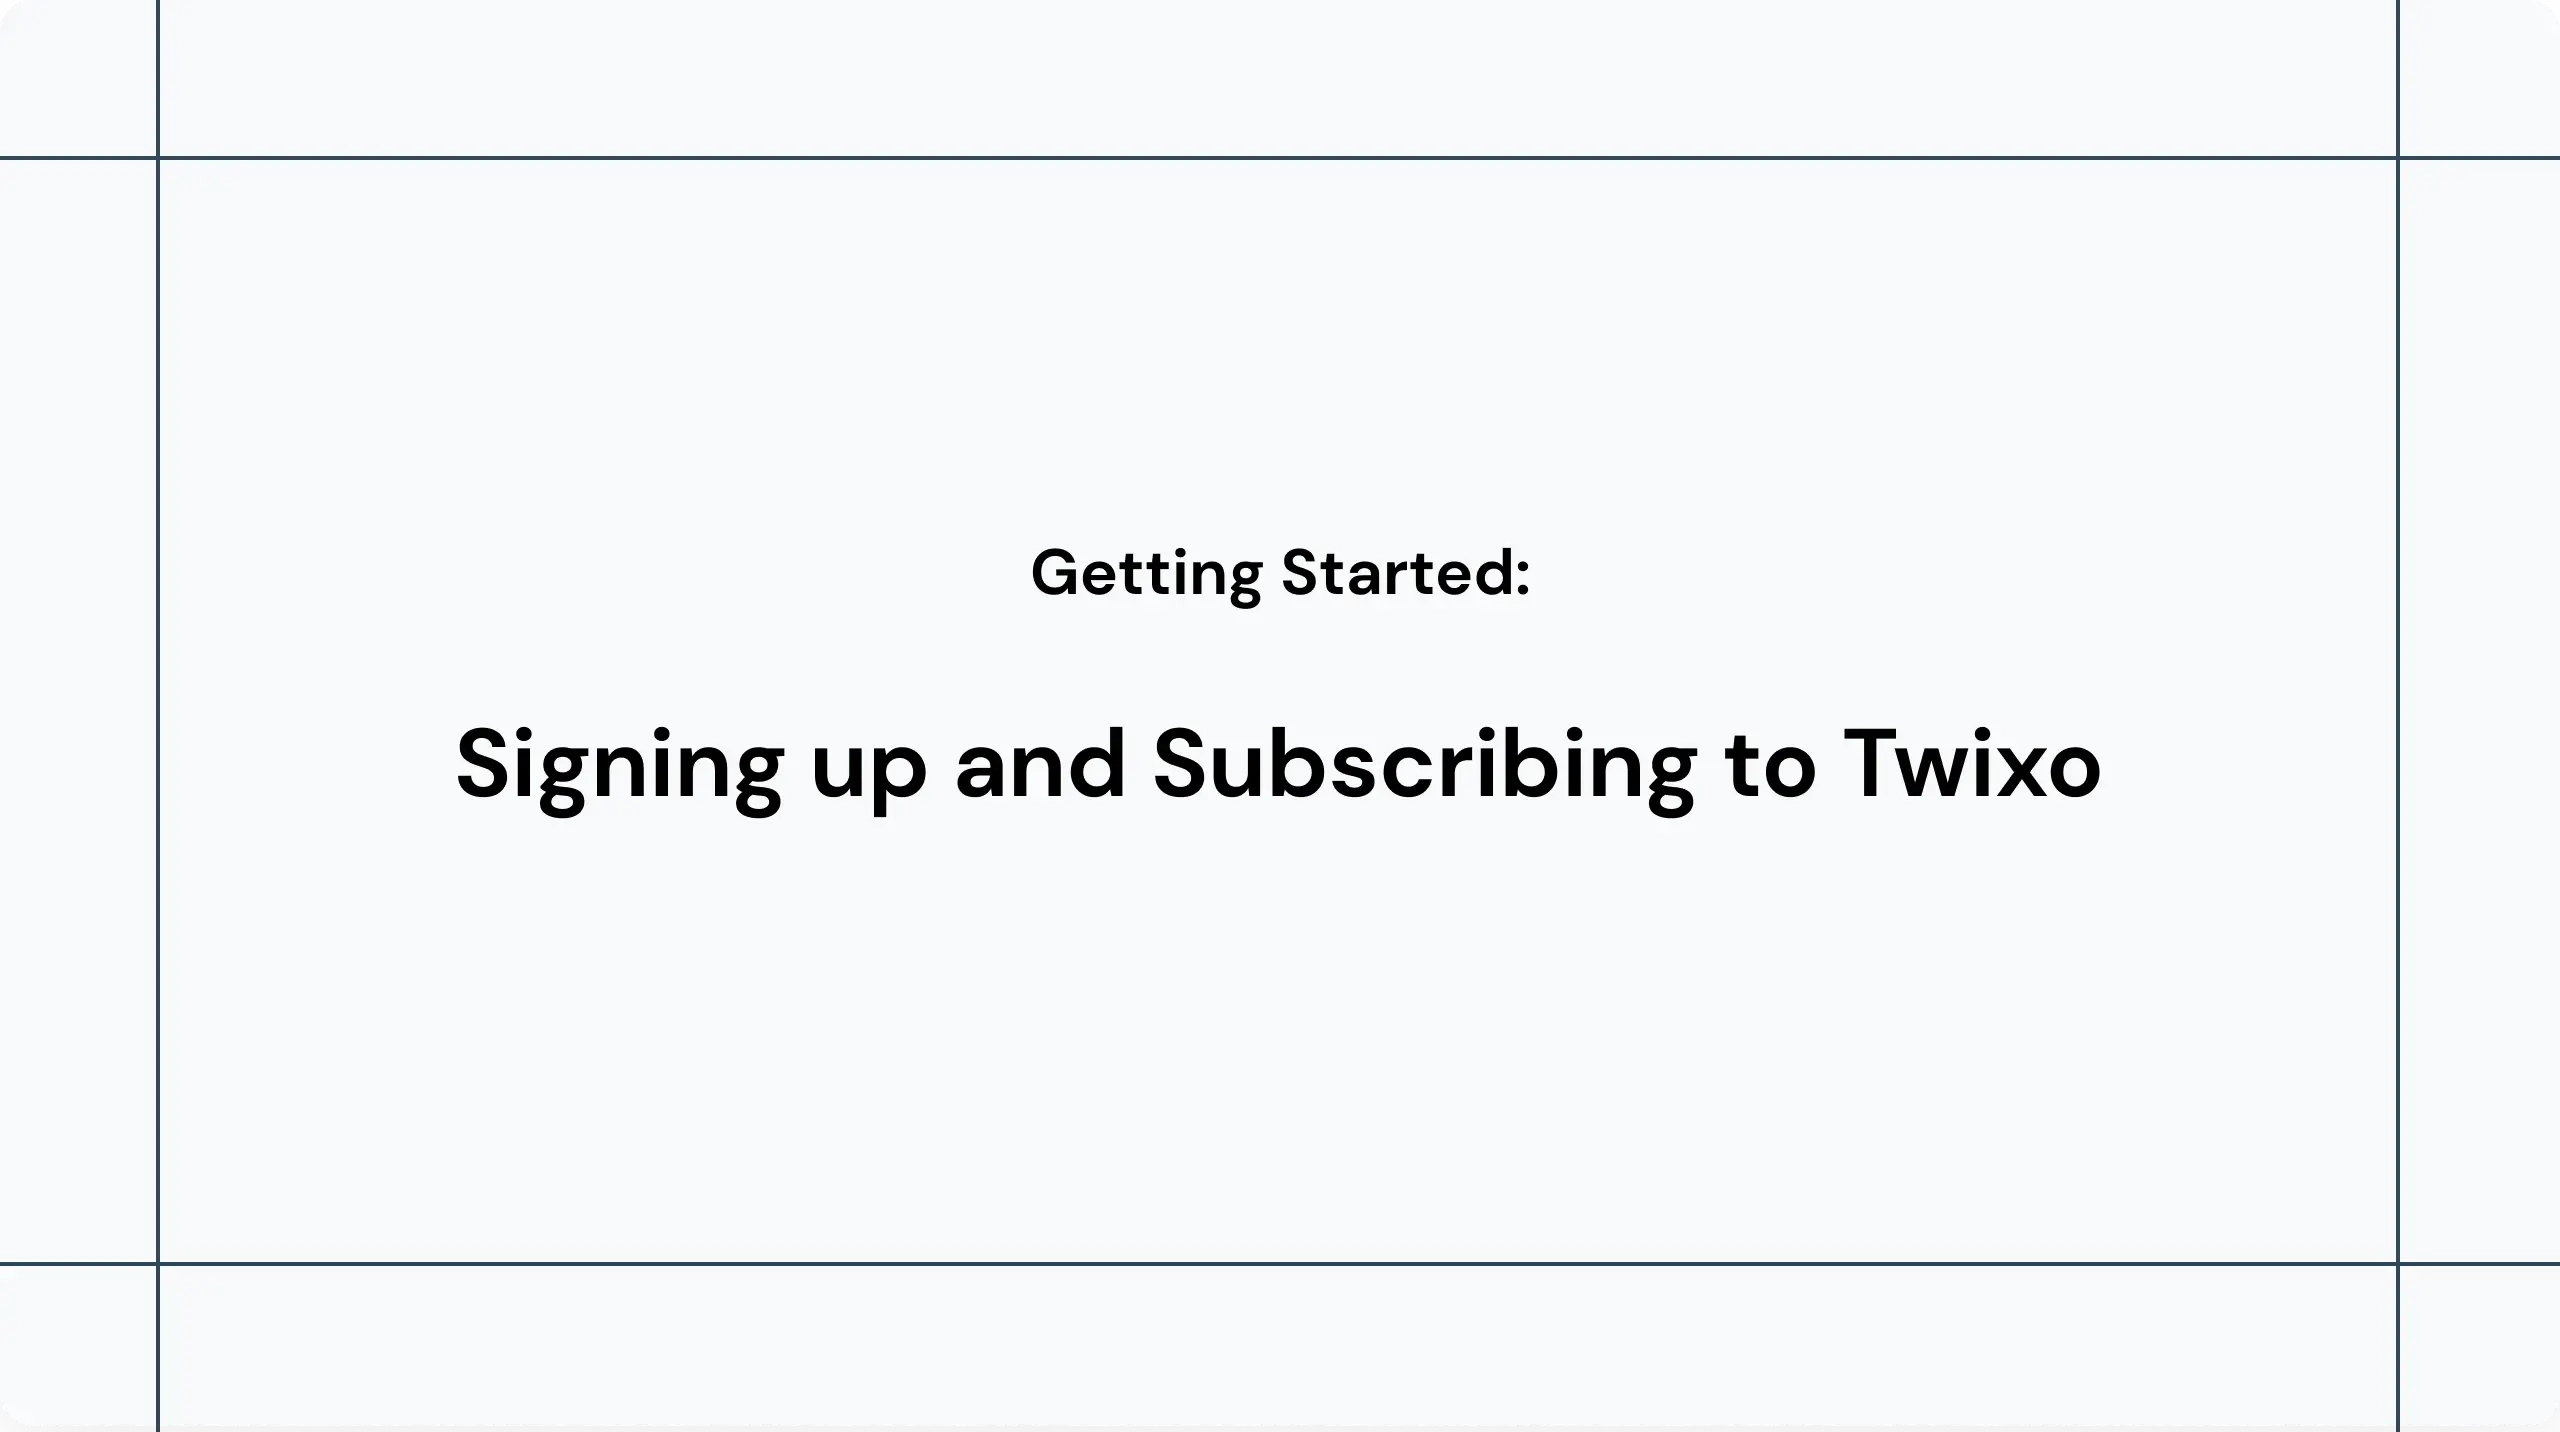 Signing up and Subscribing to Twixo